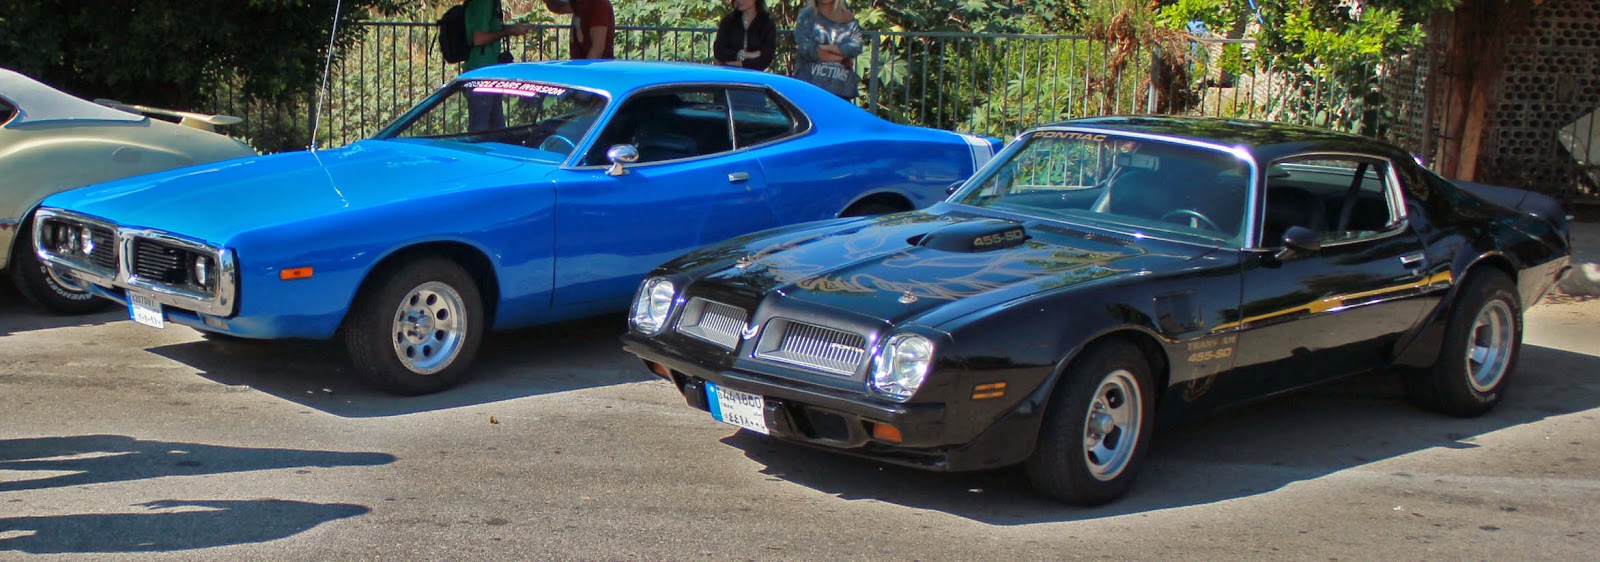 Trans am 1974 Dodge Charger 1973